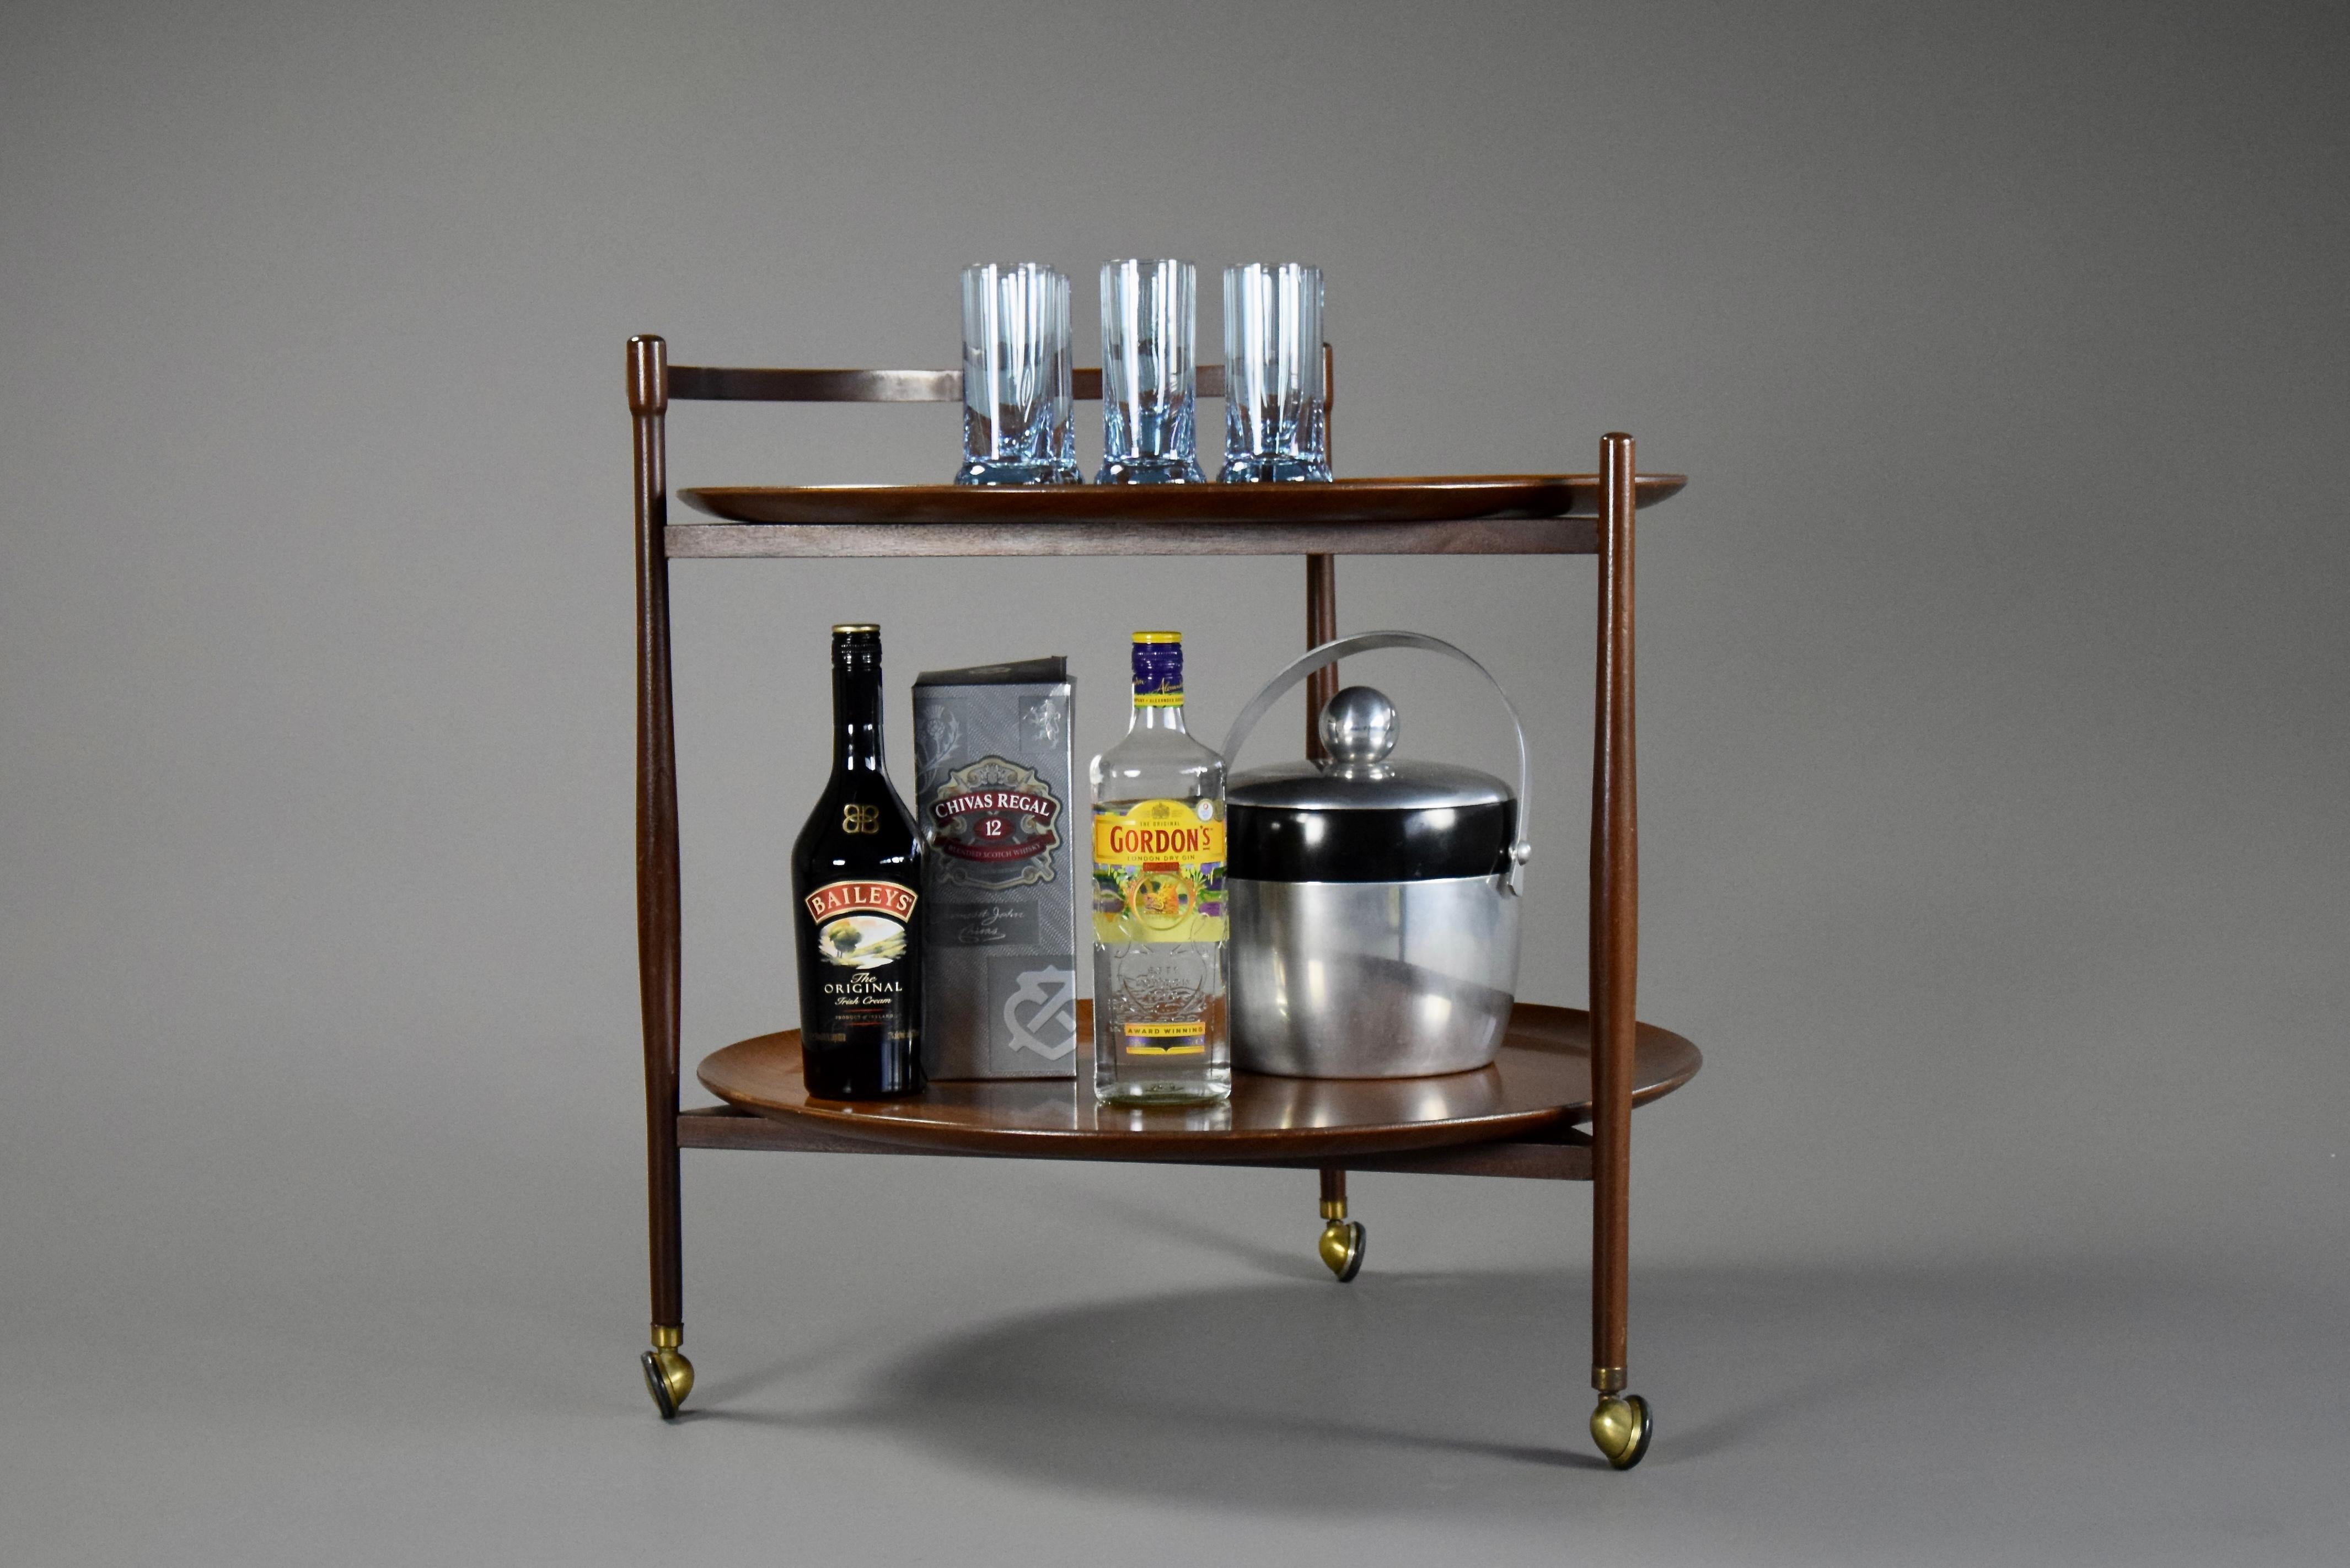 Stylish and elegant Italian Mid-Century Modern Jatoba wood two tier serve / bar trolley with two removable serving trays.
This beautiful trolley is in very good condition and can be used perfectly as it is.
It will be shipped overseas insured in a